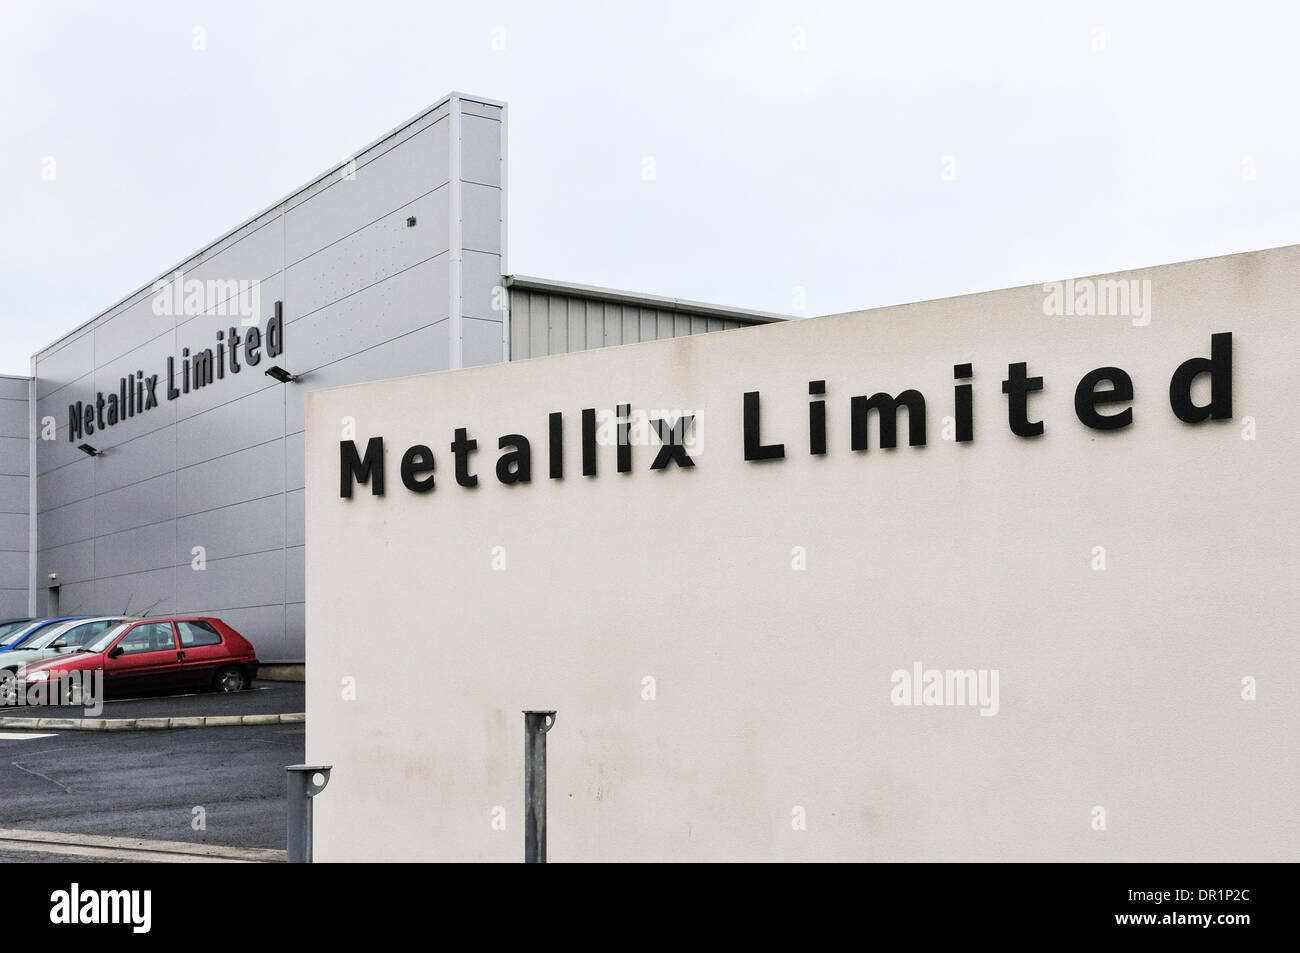 Ballymena, Northern Ireland. 17 Jan 2014 - Metallix Limited fabrication plant in Ballymena, Northern Ireland, which specialises in precision laser cutting of steel and aluminium.  Part of the Wrightbus group. Credit:  Stephen Barnes/Alamy Live News Stock Photo